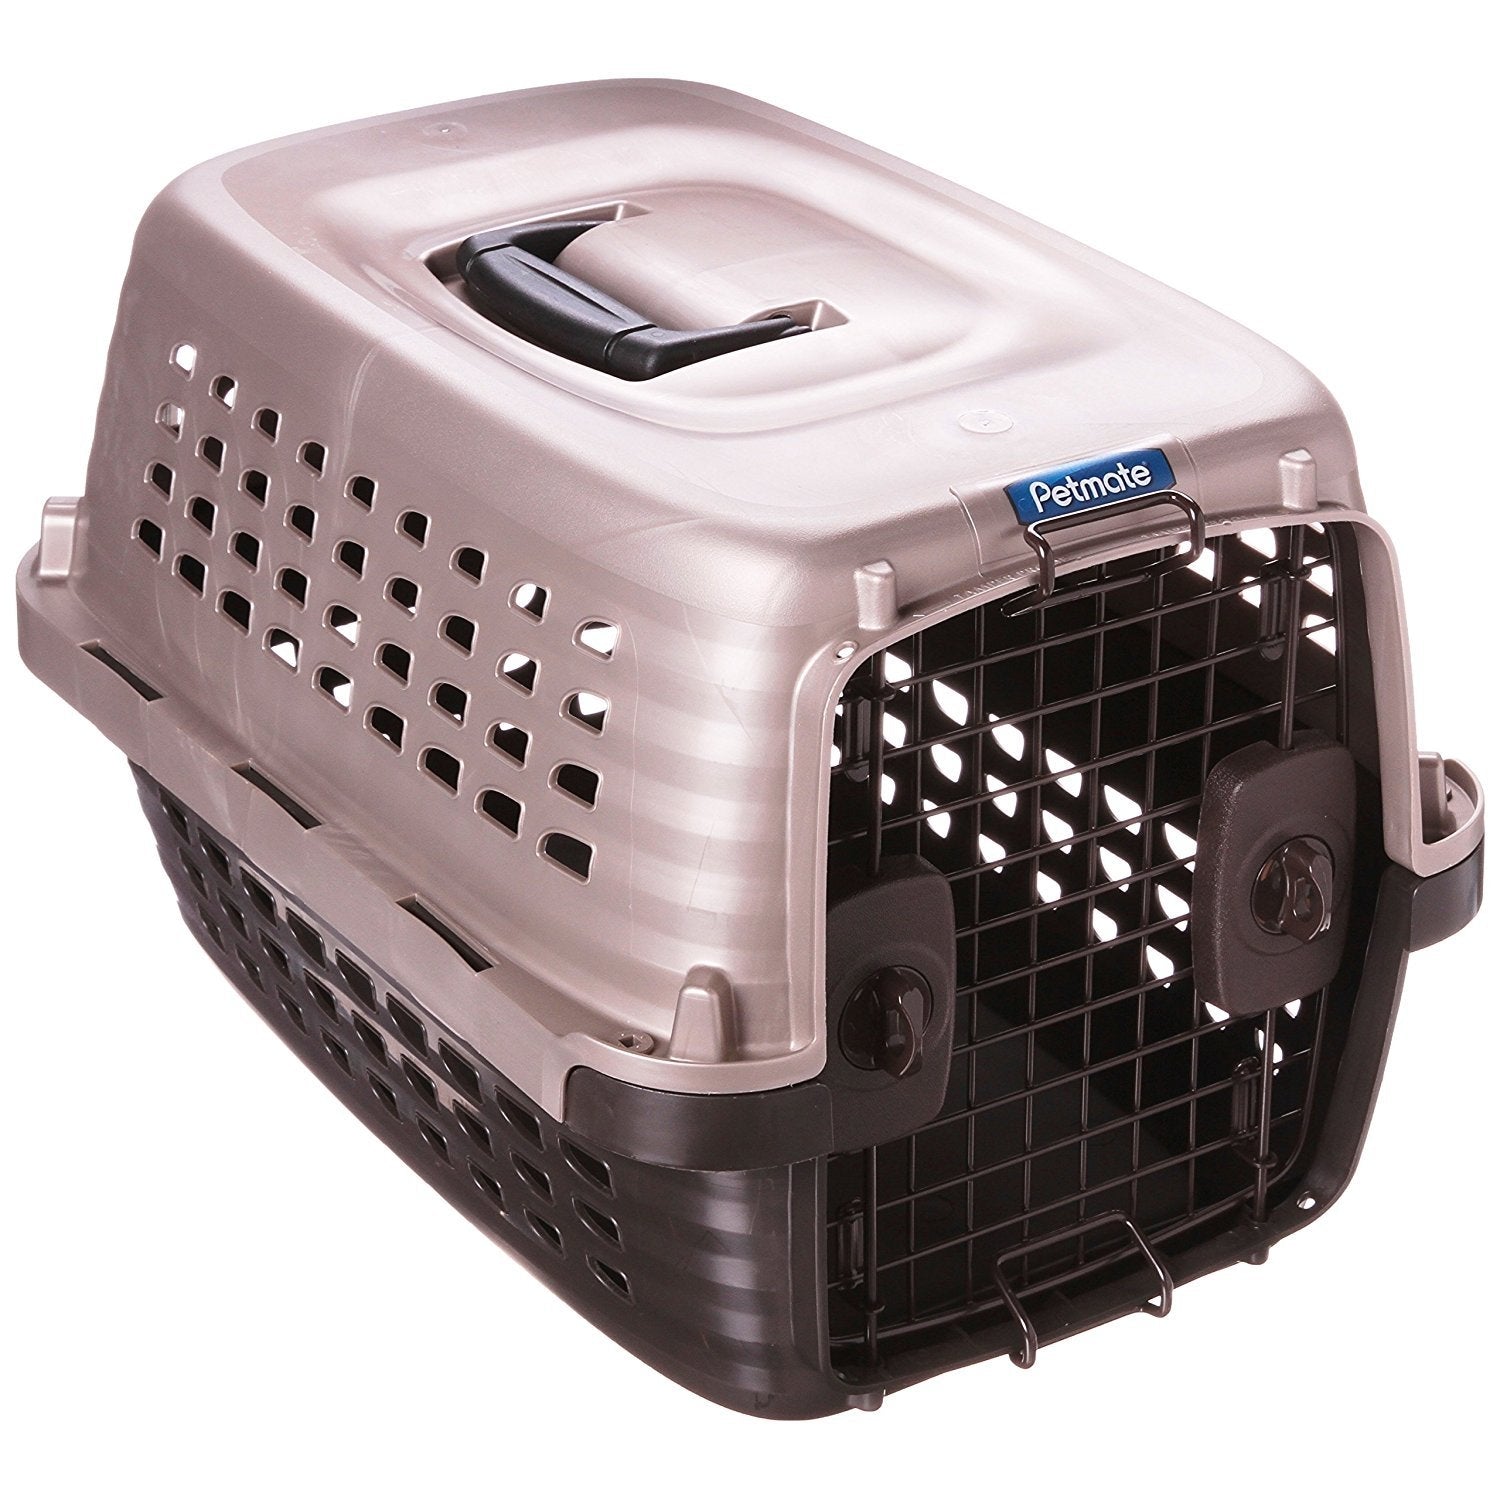 travel dog crate for large dogs